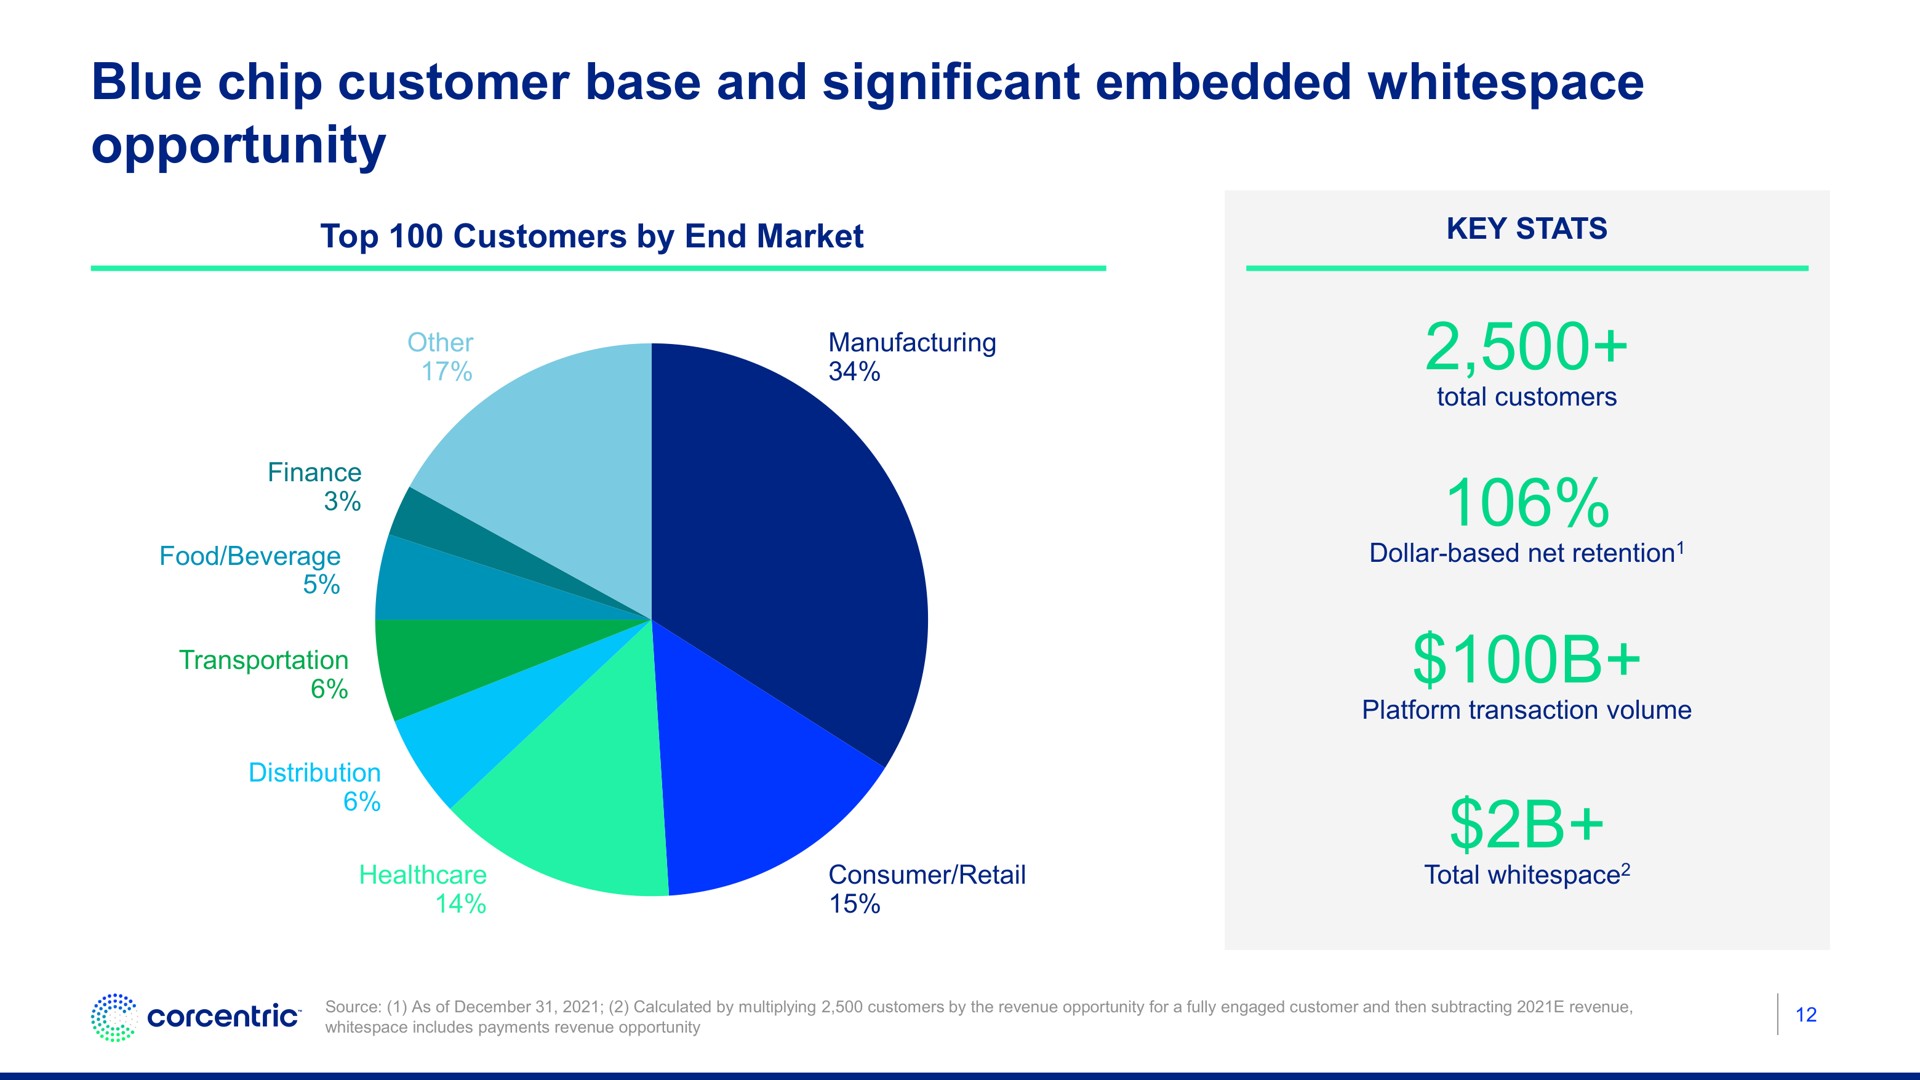 blue chip customer base and significant embedded opportunity | Corecentric